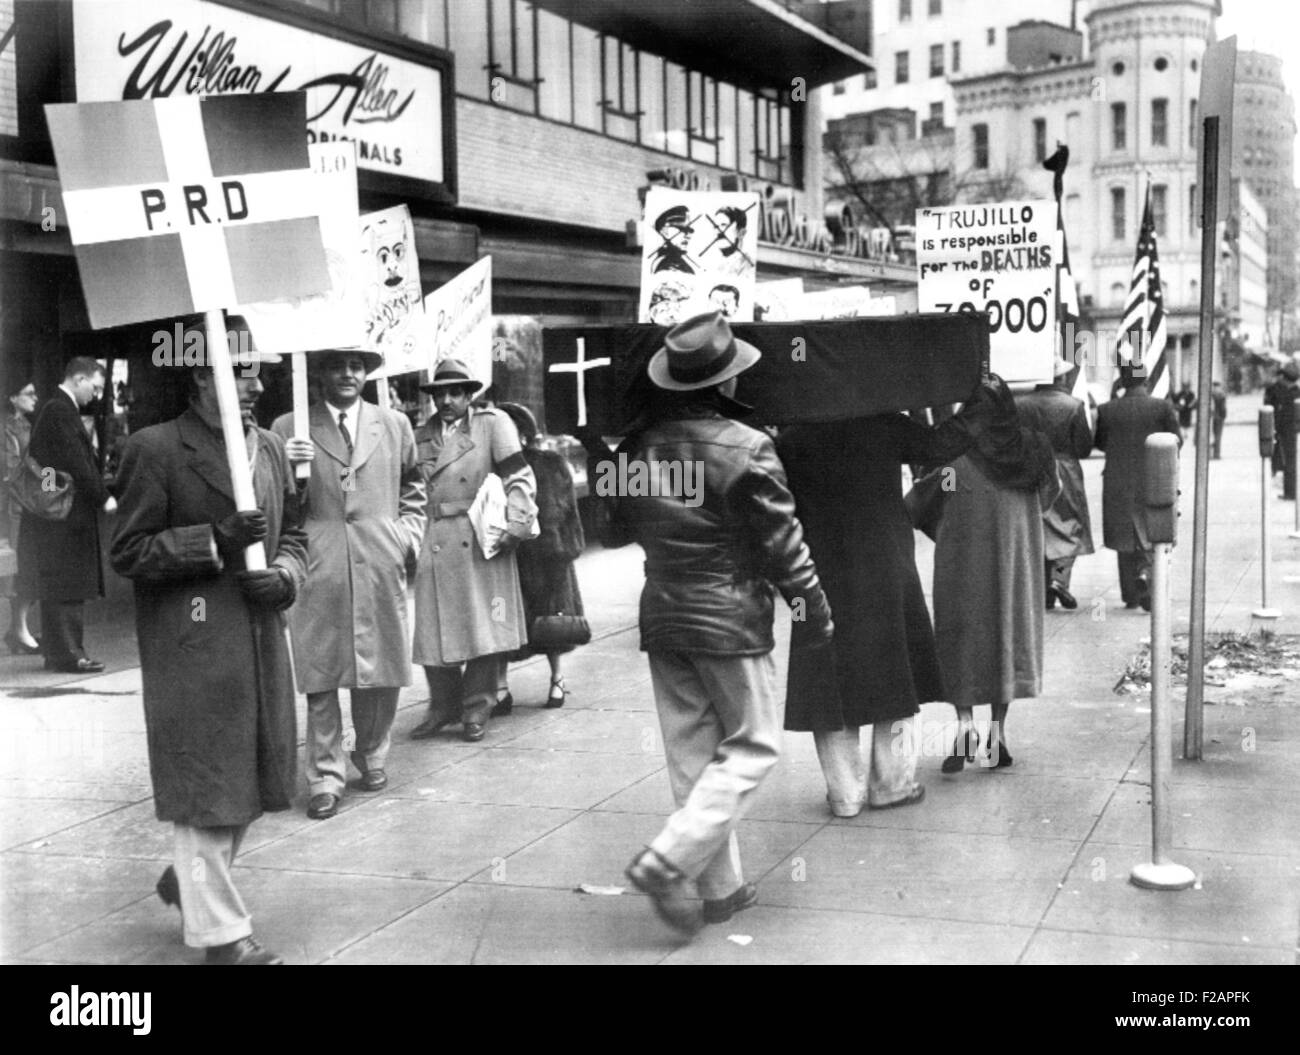 Dominican pickets demonstrated against the visit of Dictator Rafael Trujillo to U.S. Jan. 11, 1953. They carry a black coffin and signs near the Mayflower Hotel, Washington, D.C. One sign reads 'Trujillo is responsible for DEATHS of 70,000,' referring to Parsley Massacre of Haitians in 1937. (CSU 2015 11 1707) Stock Photo